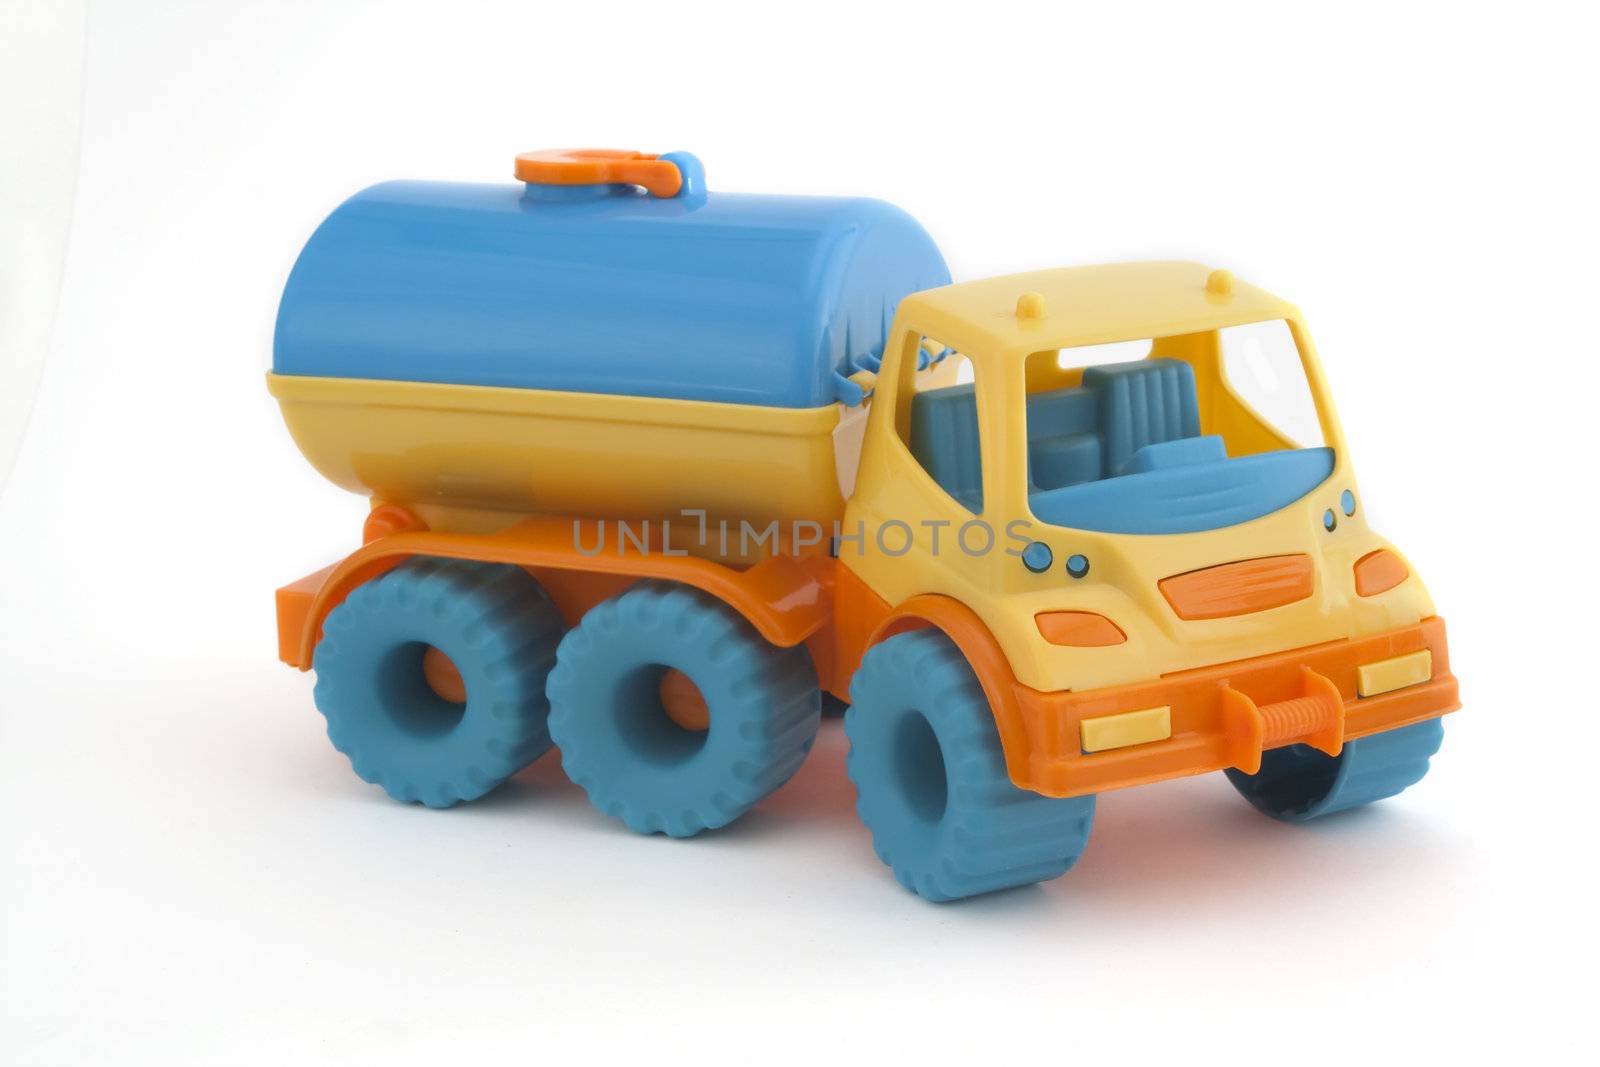 children's toy tank car on a white background